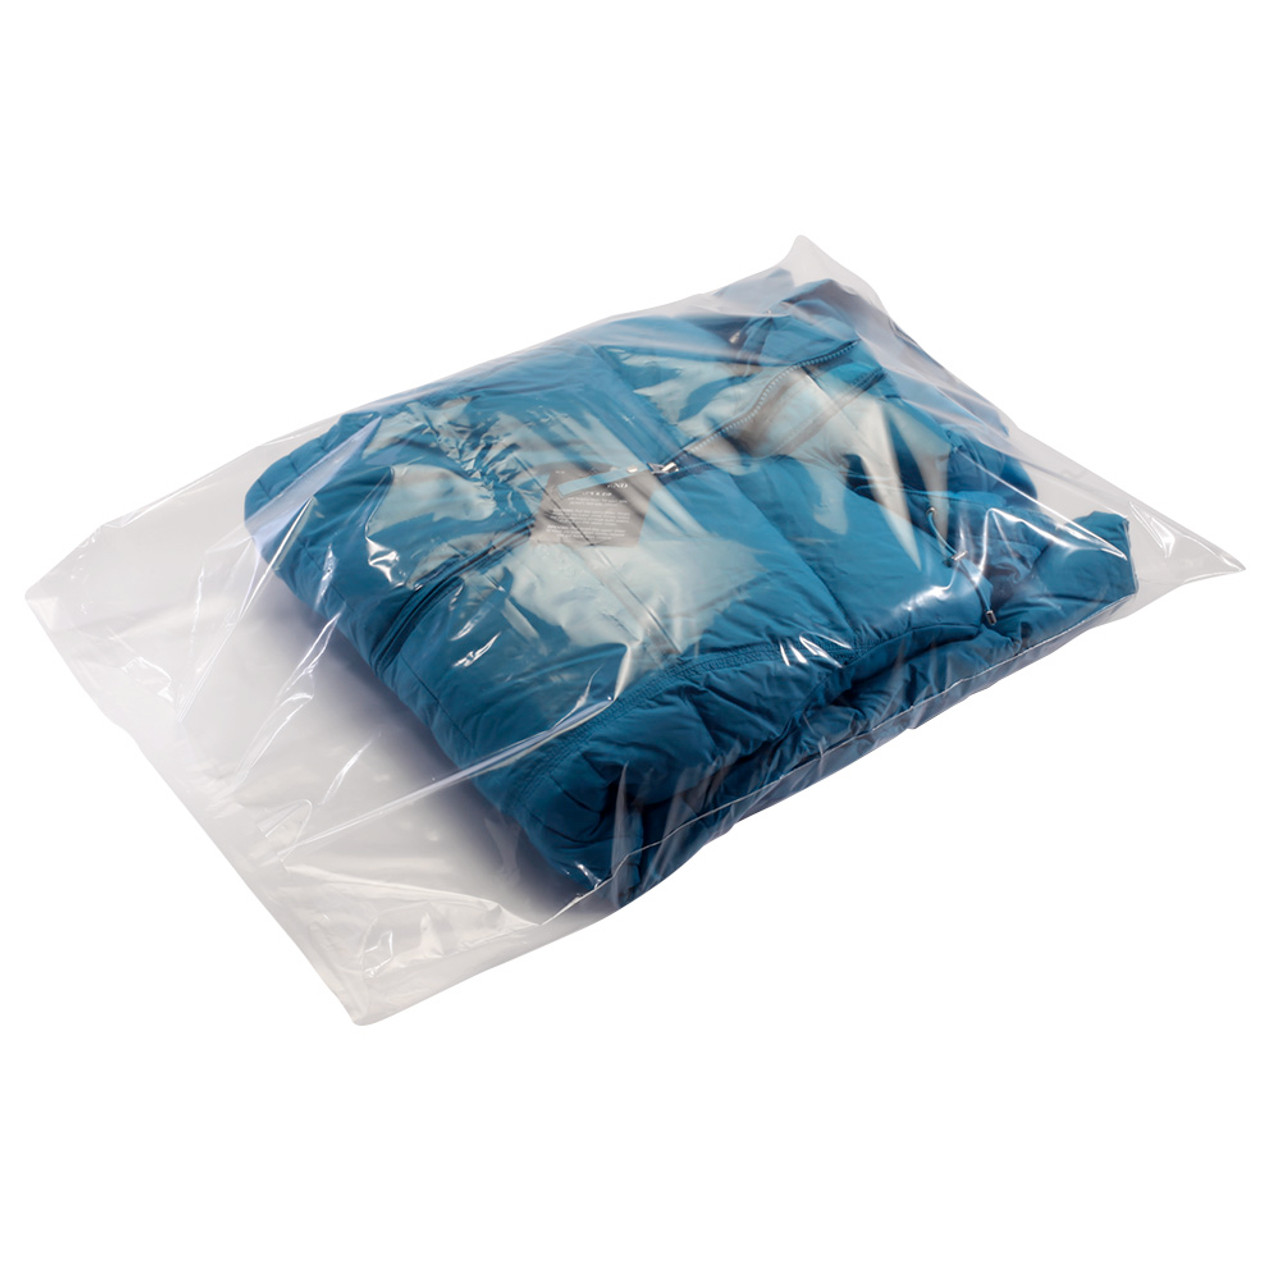 22X36 - 1.5 mil - clear - layflat poly bags - 500 bags/case